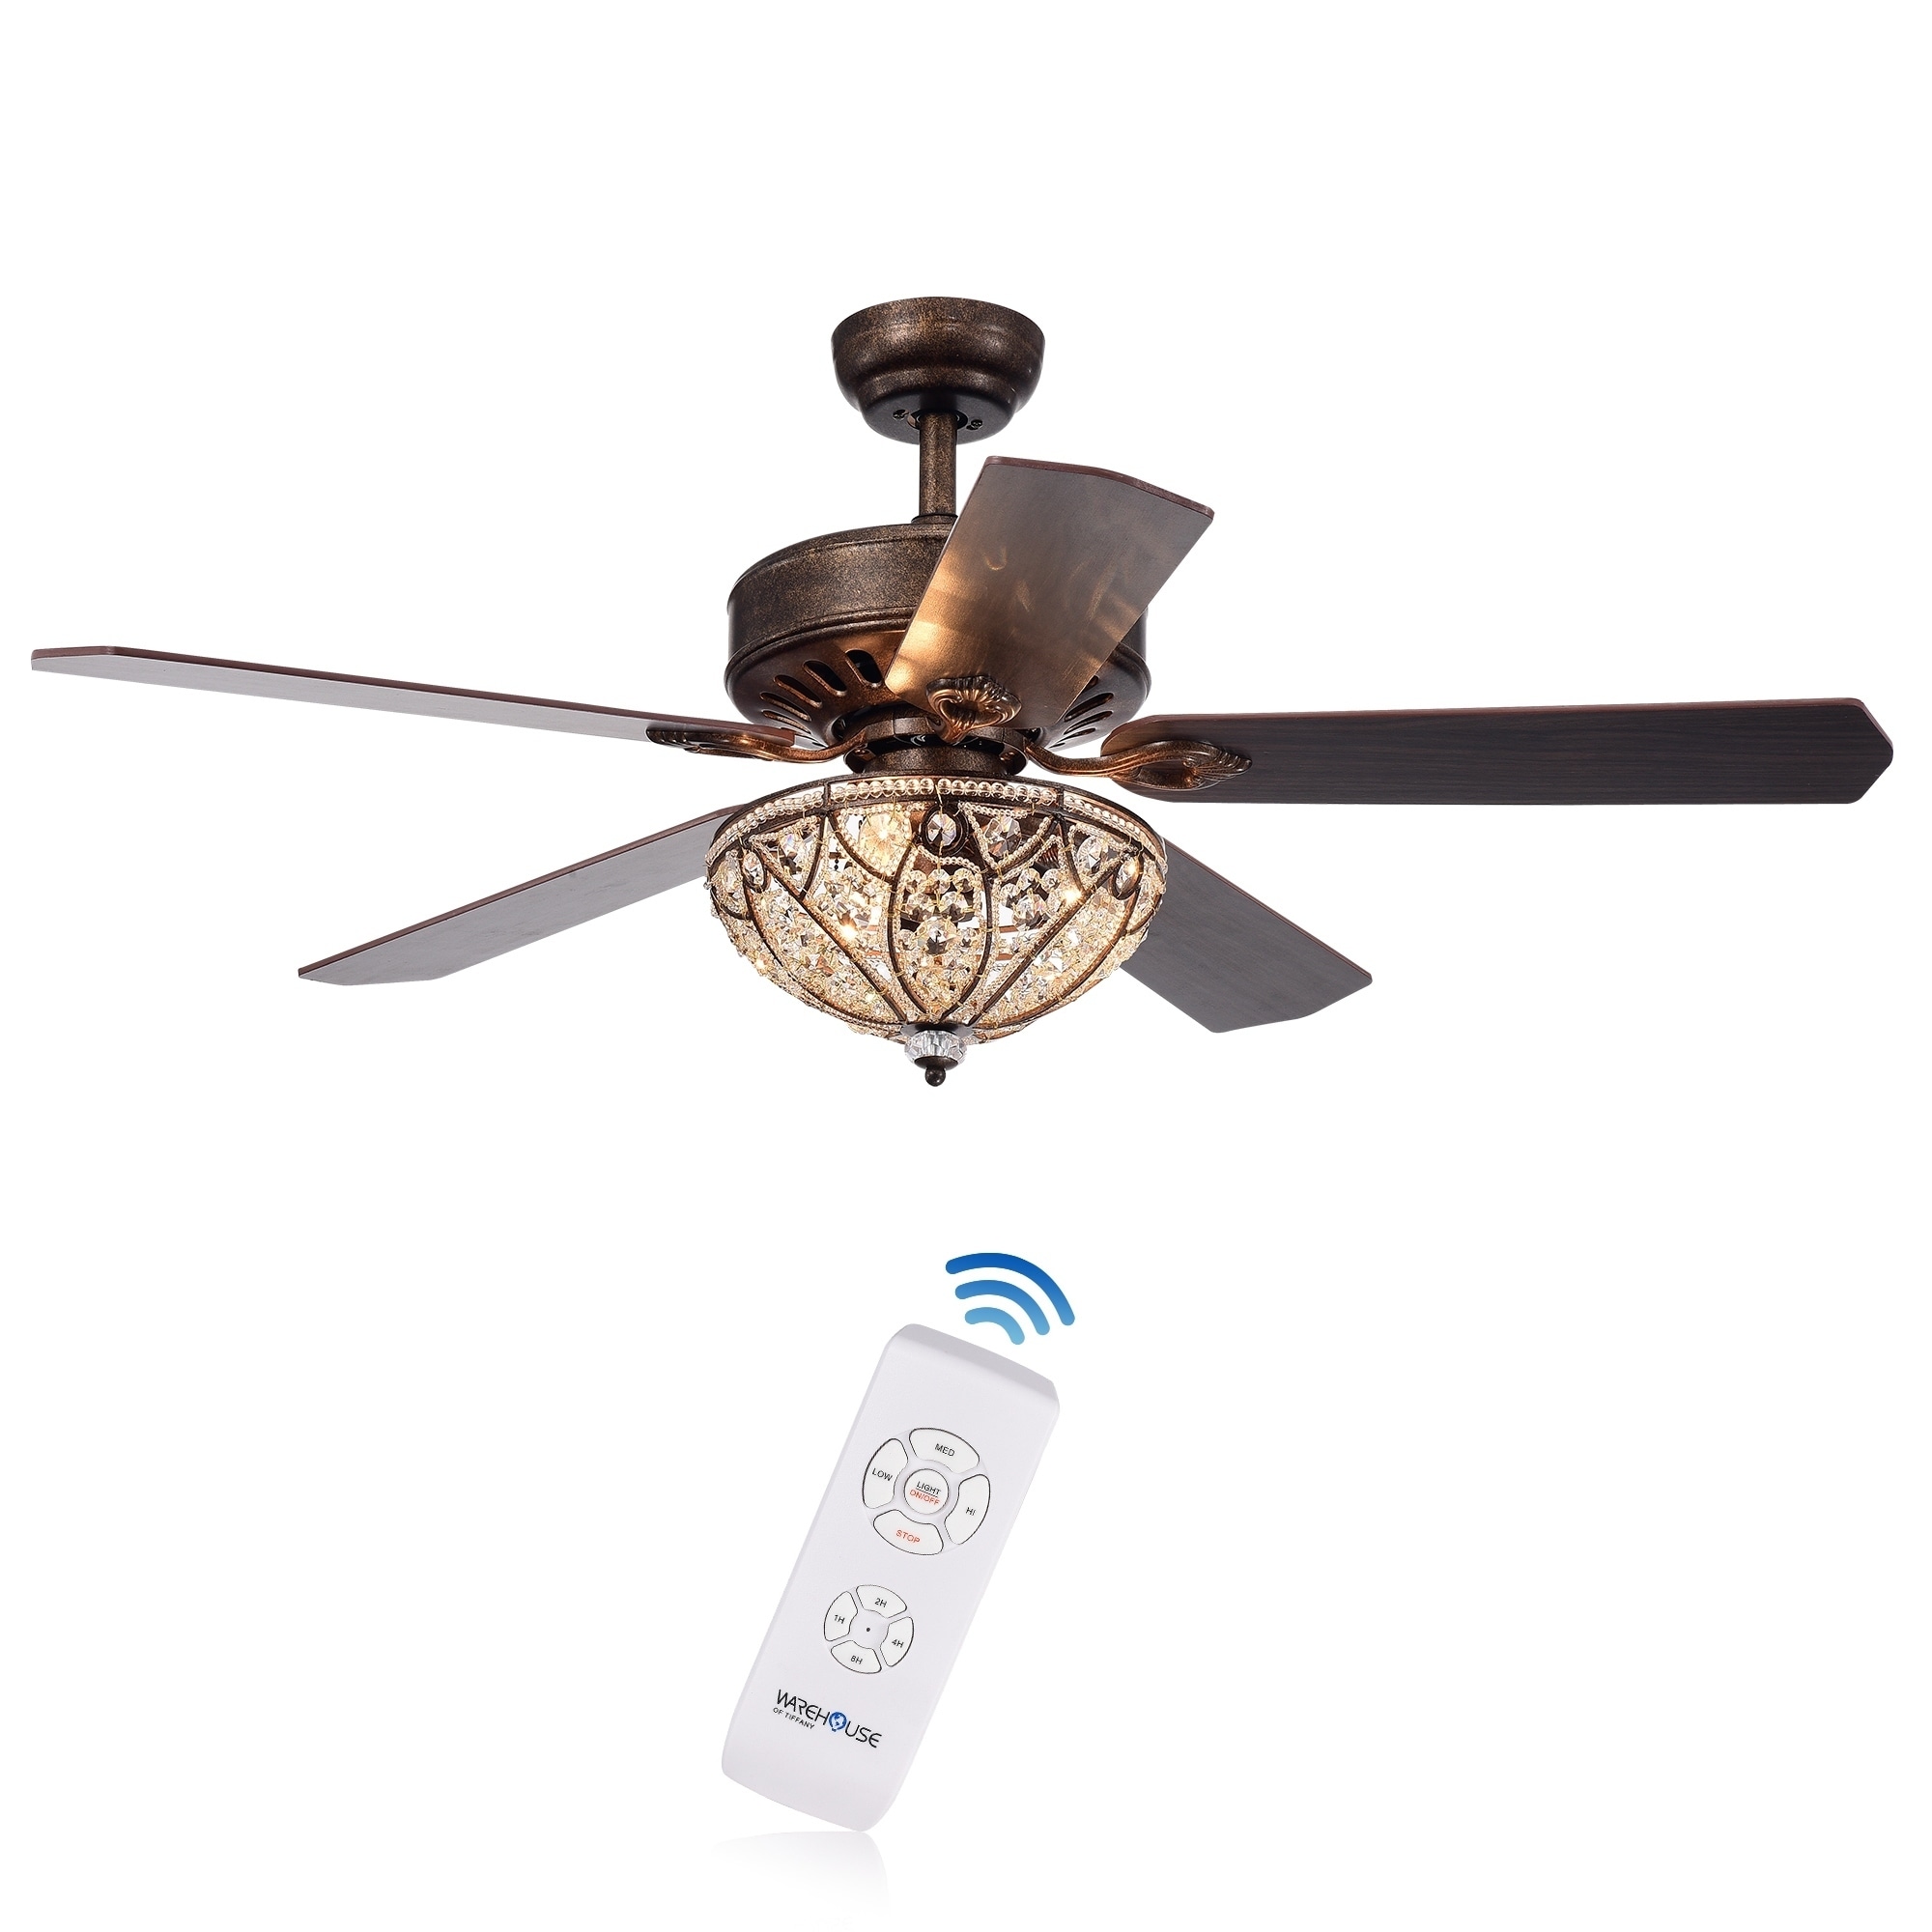 Gliska 52 Inch 5 Blade Rustic Bronze Lighted Ceiling Fans W Crystal Shade Optional Remote Control Incl 2 Color Option Blades